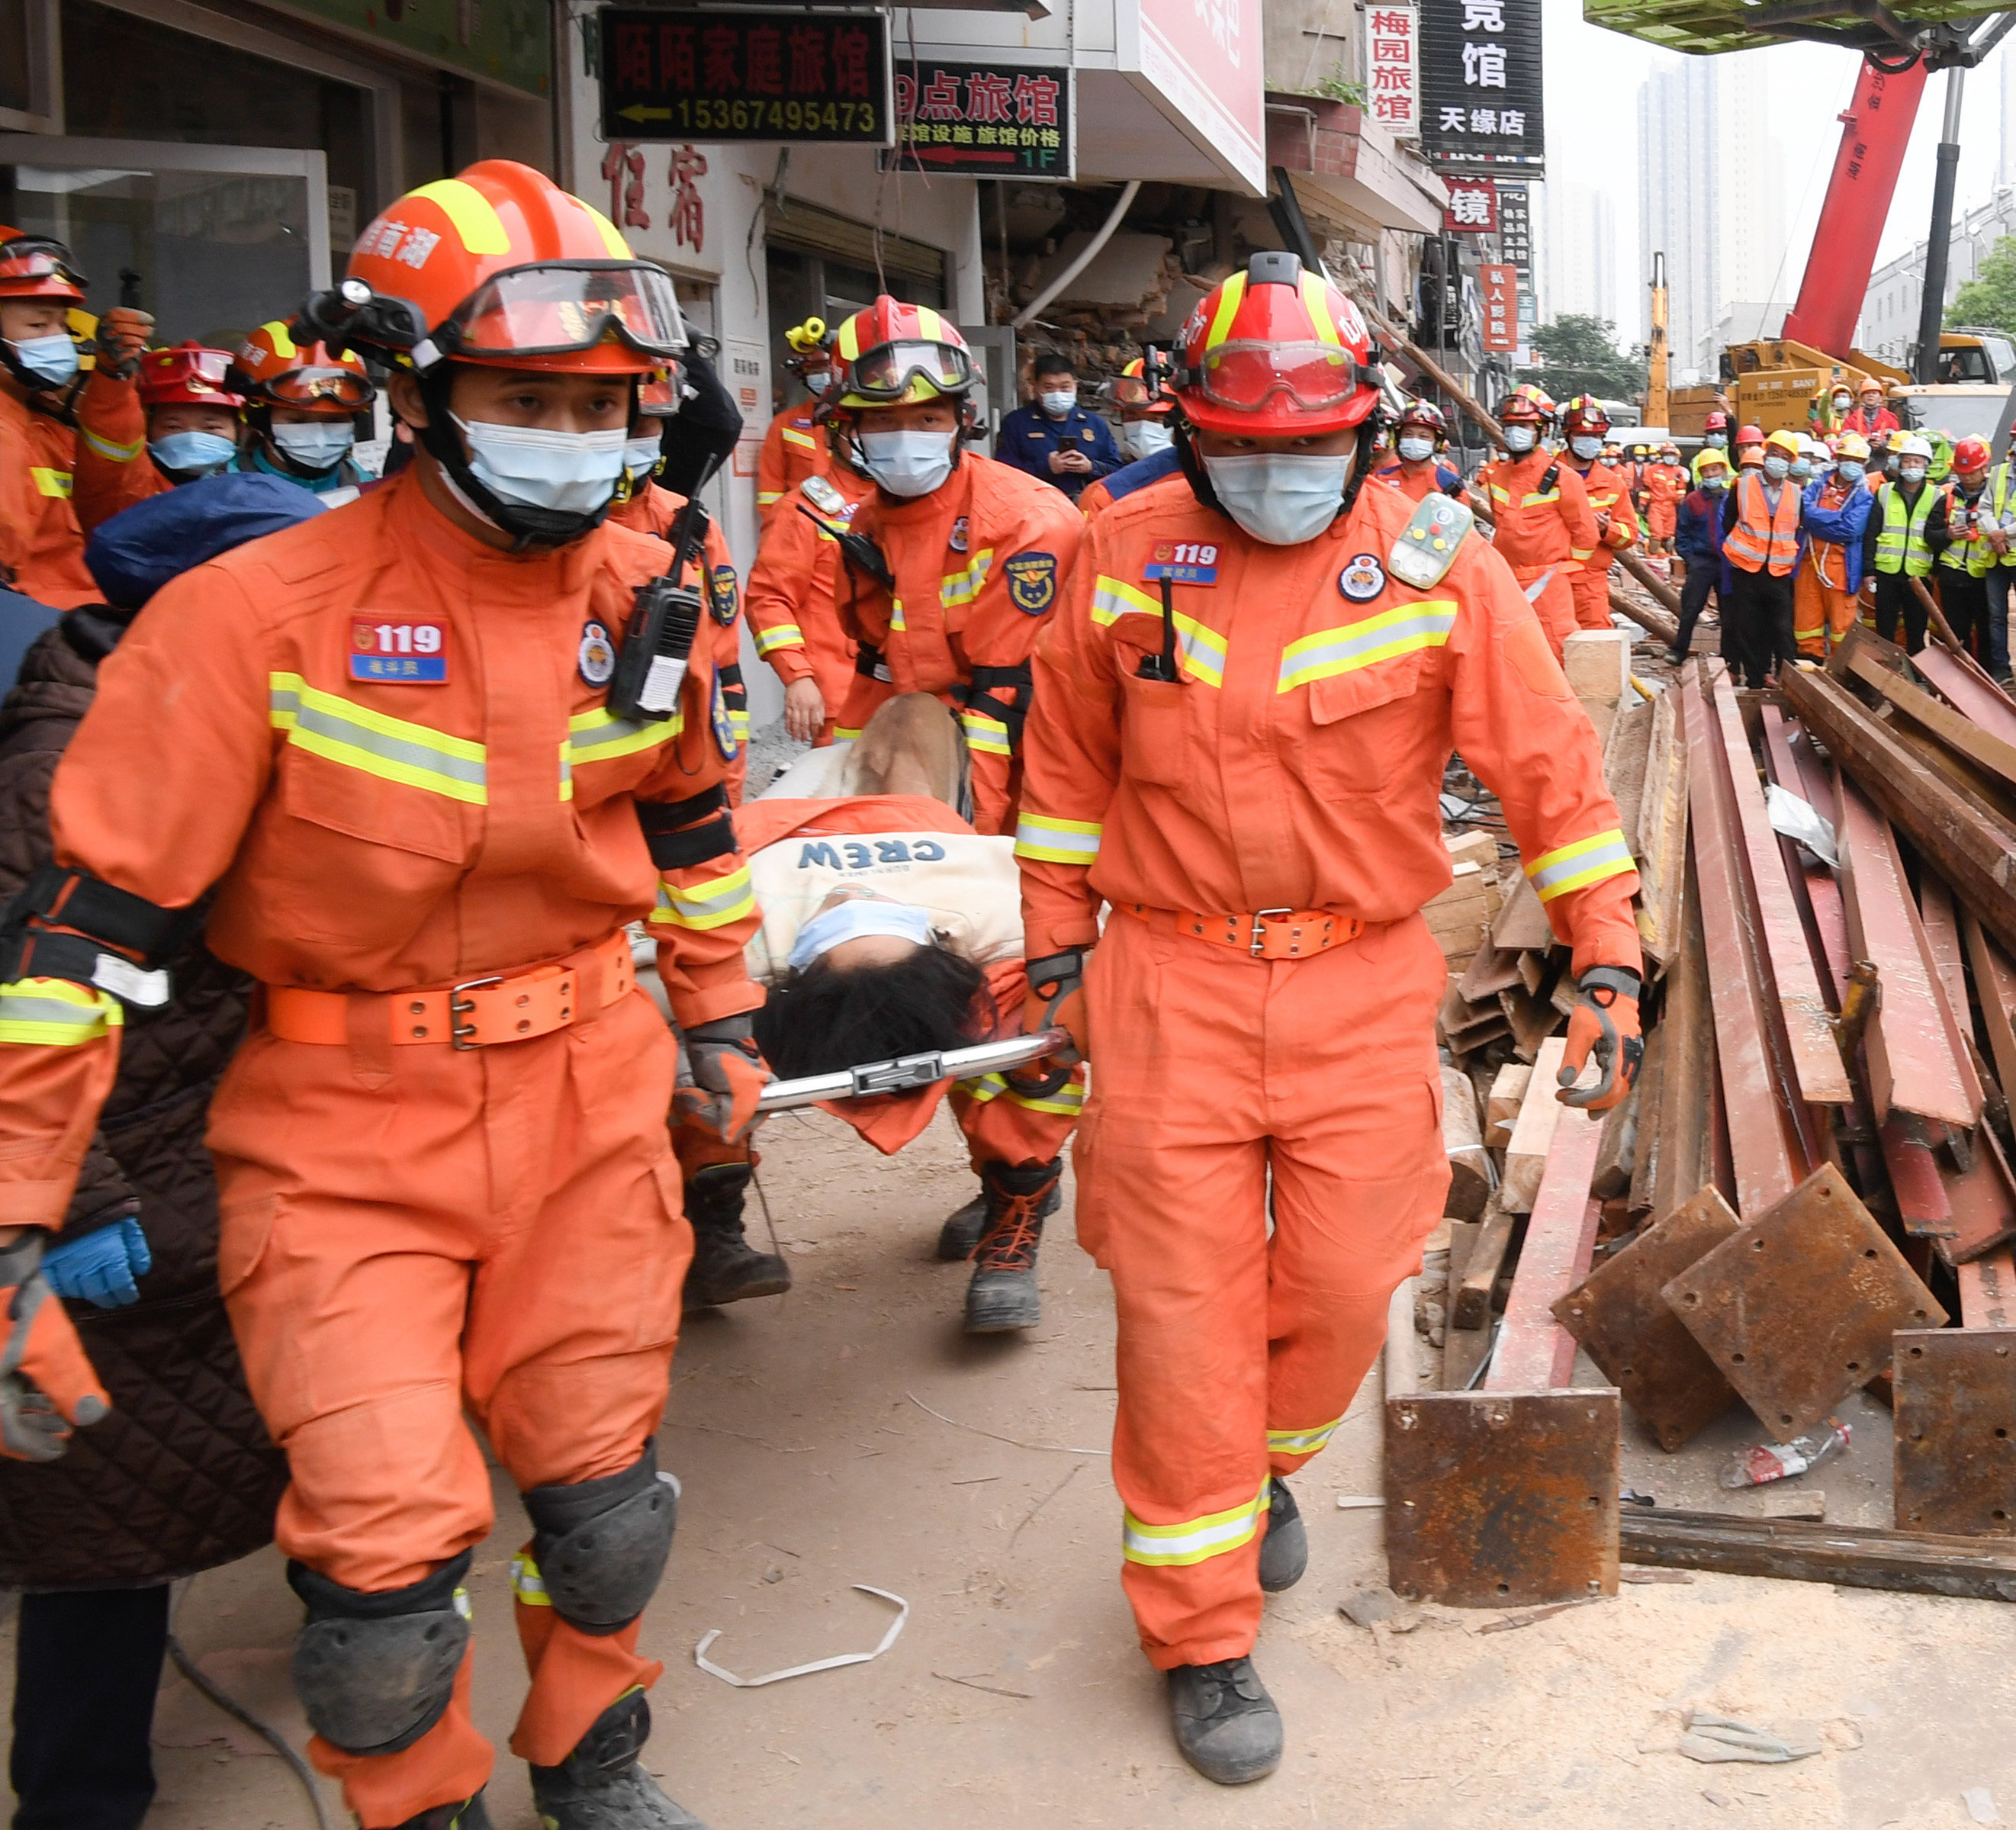 Seven people have been pulled from the rubble, with the latest rescue taking place more than 50 hours into the search effort. Photo: Xinhua